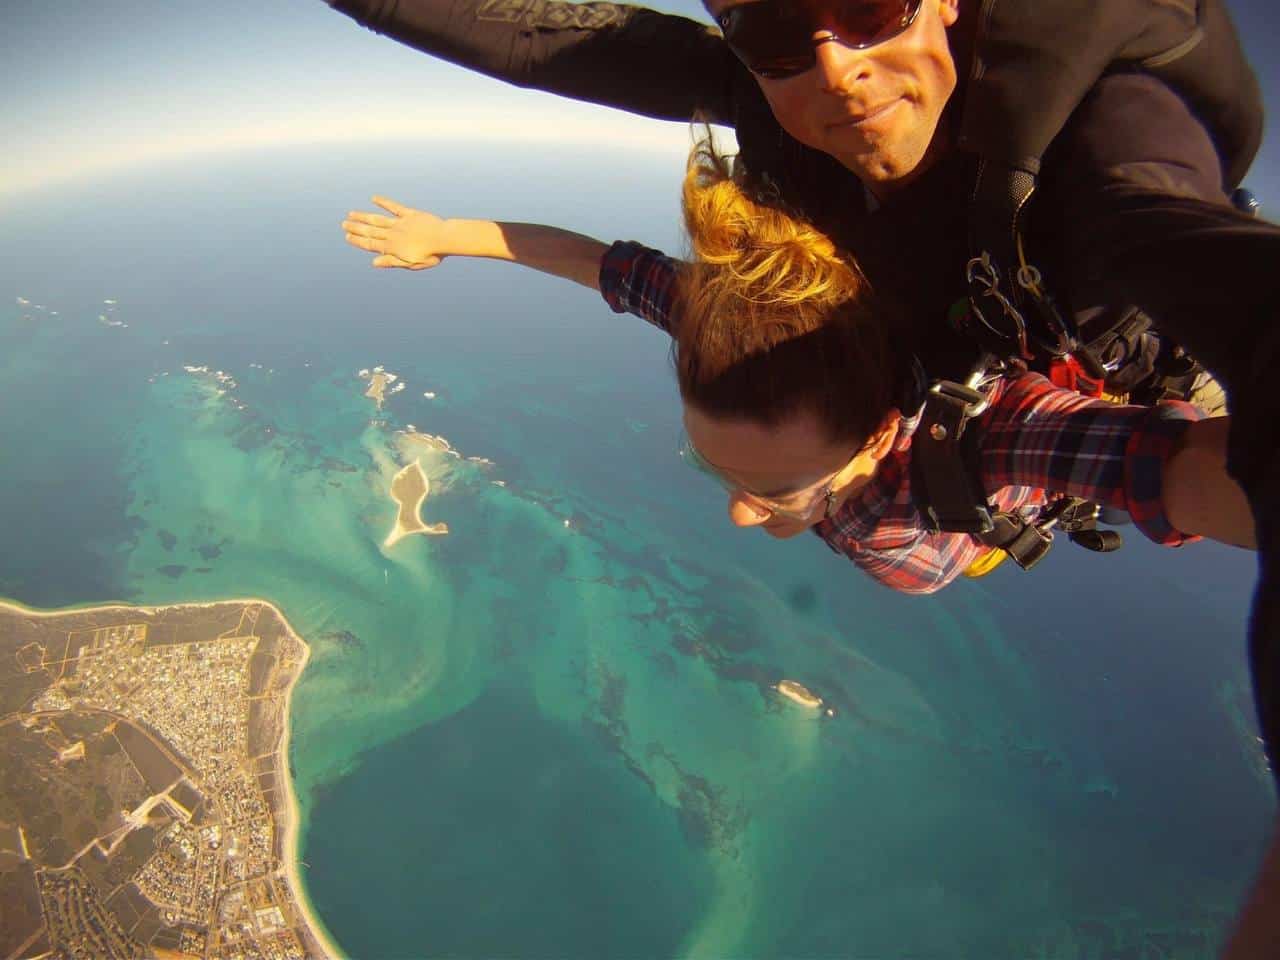 Thrilling first-person perspective of a skydiving adventure over the stunning turquoise waters of the Indian Ocean, at Jurien Bay near Perth, with coastal town views below, on a clear day making for an unforgettable experience.